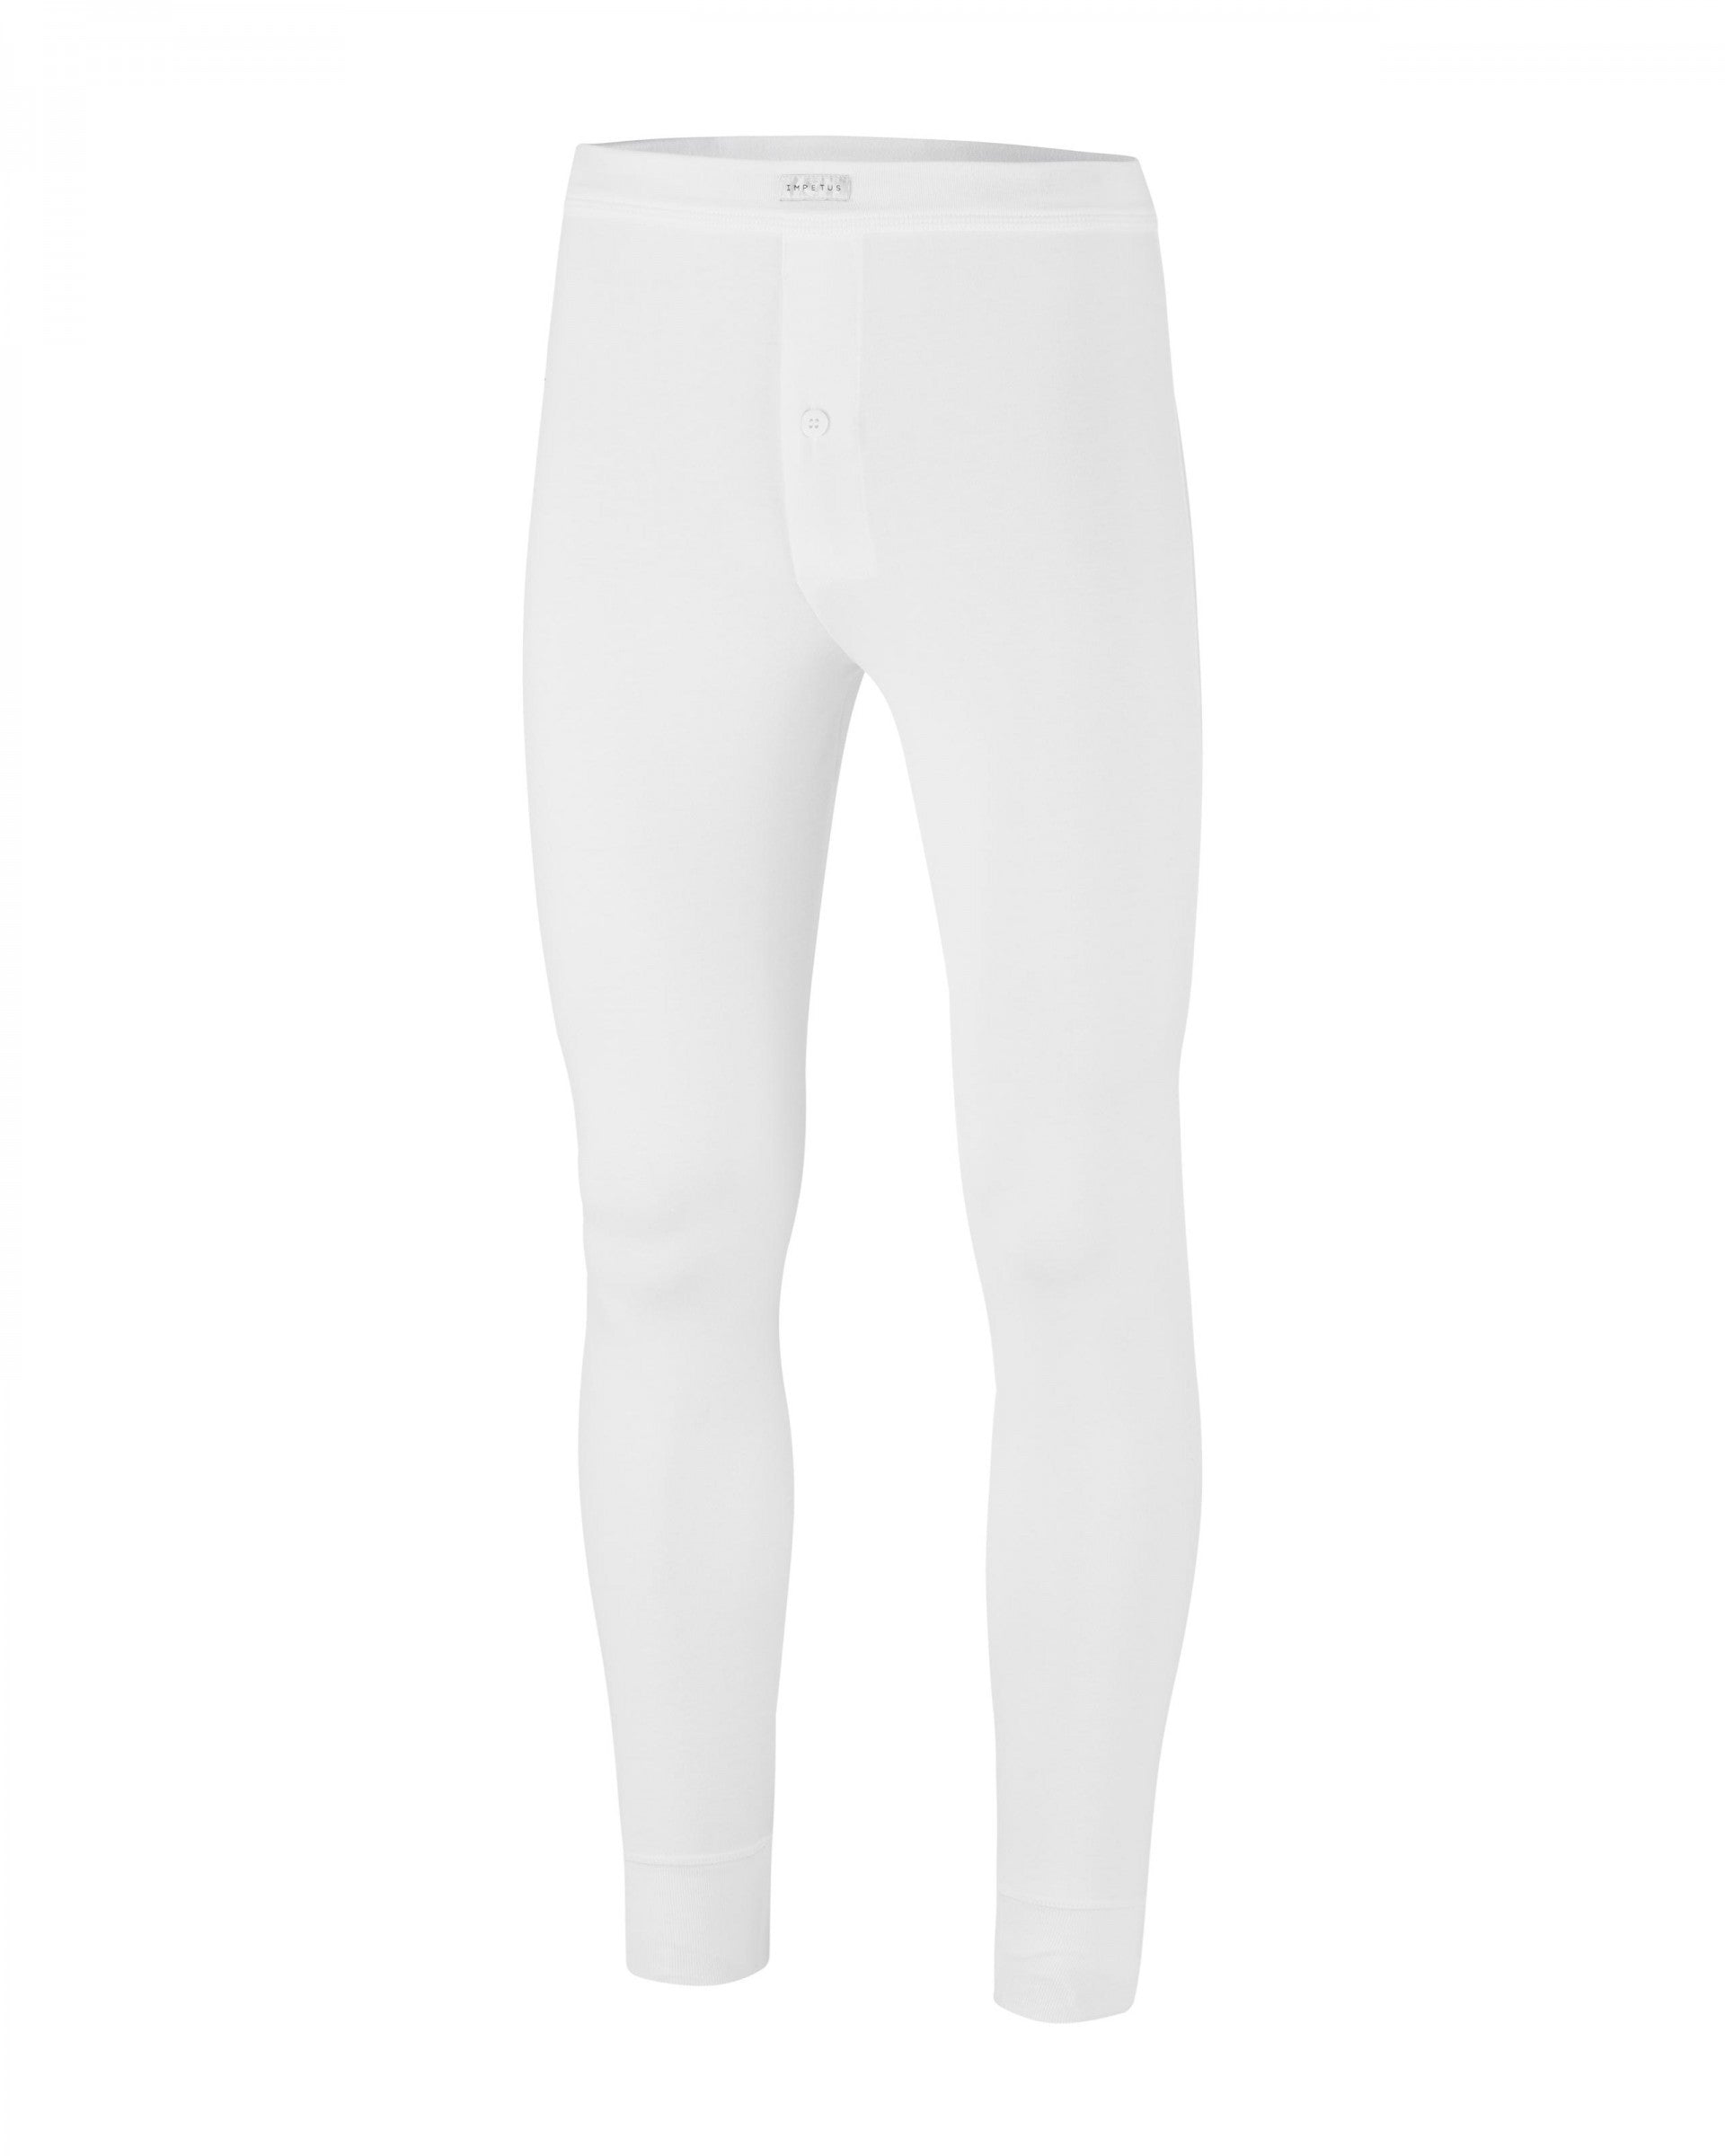 Thermo inner pant